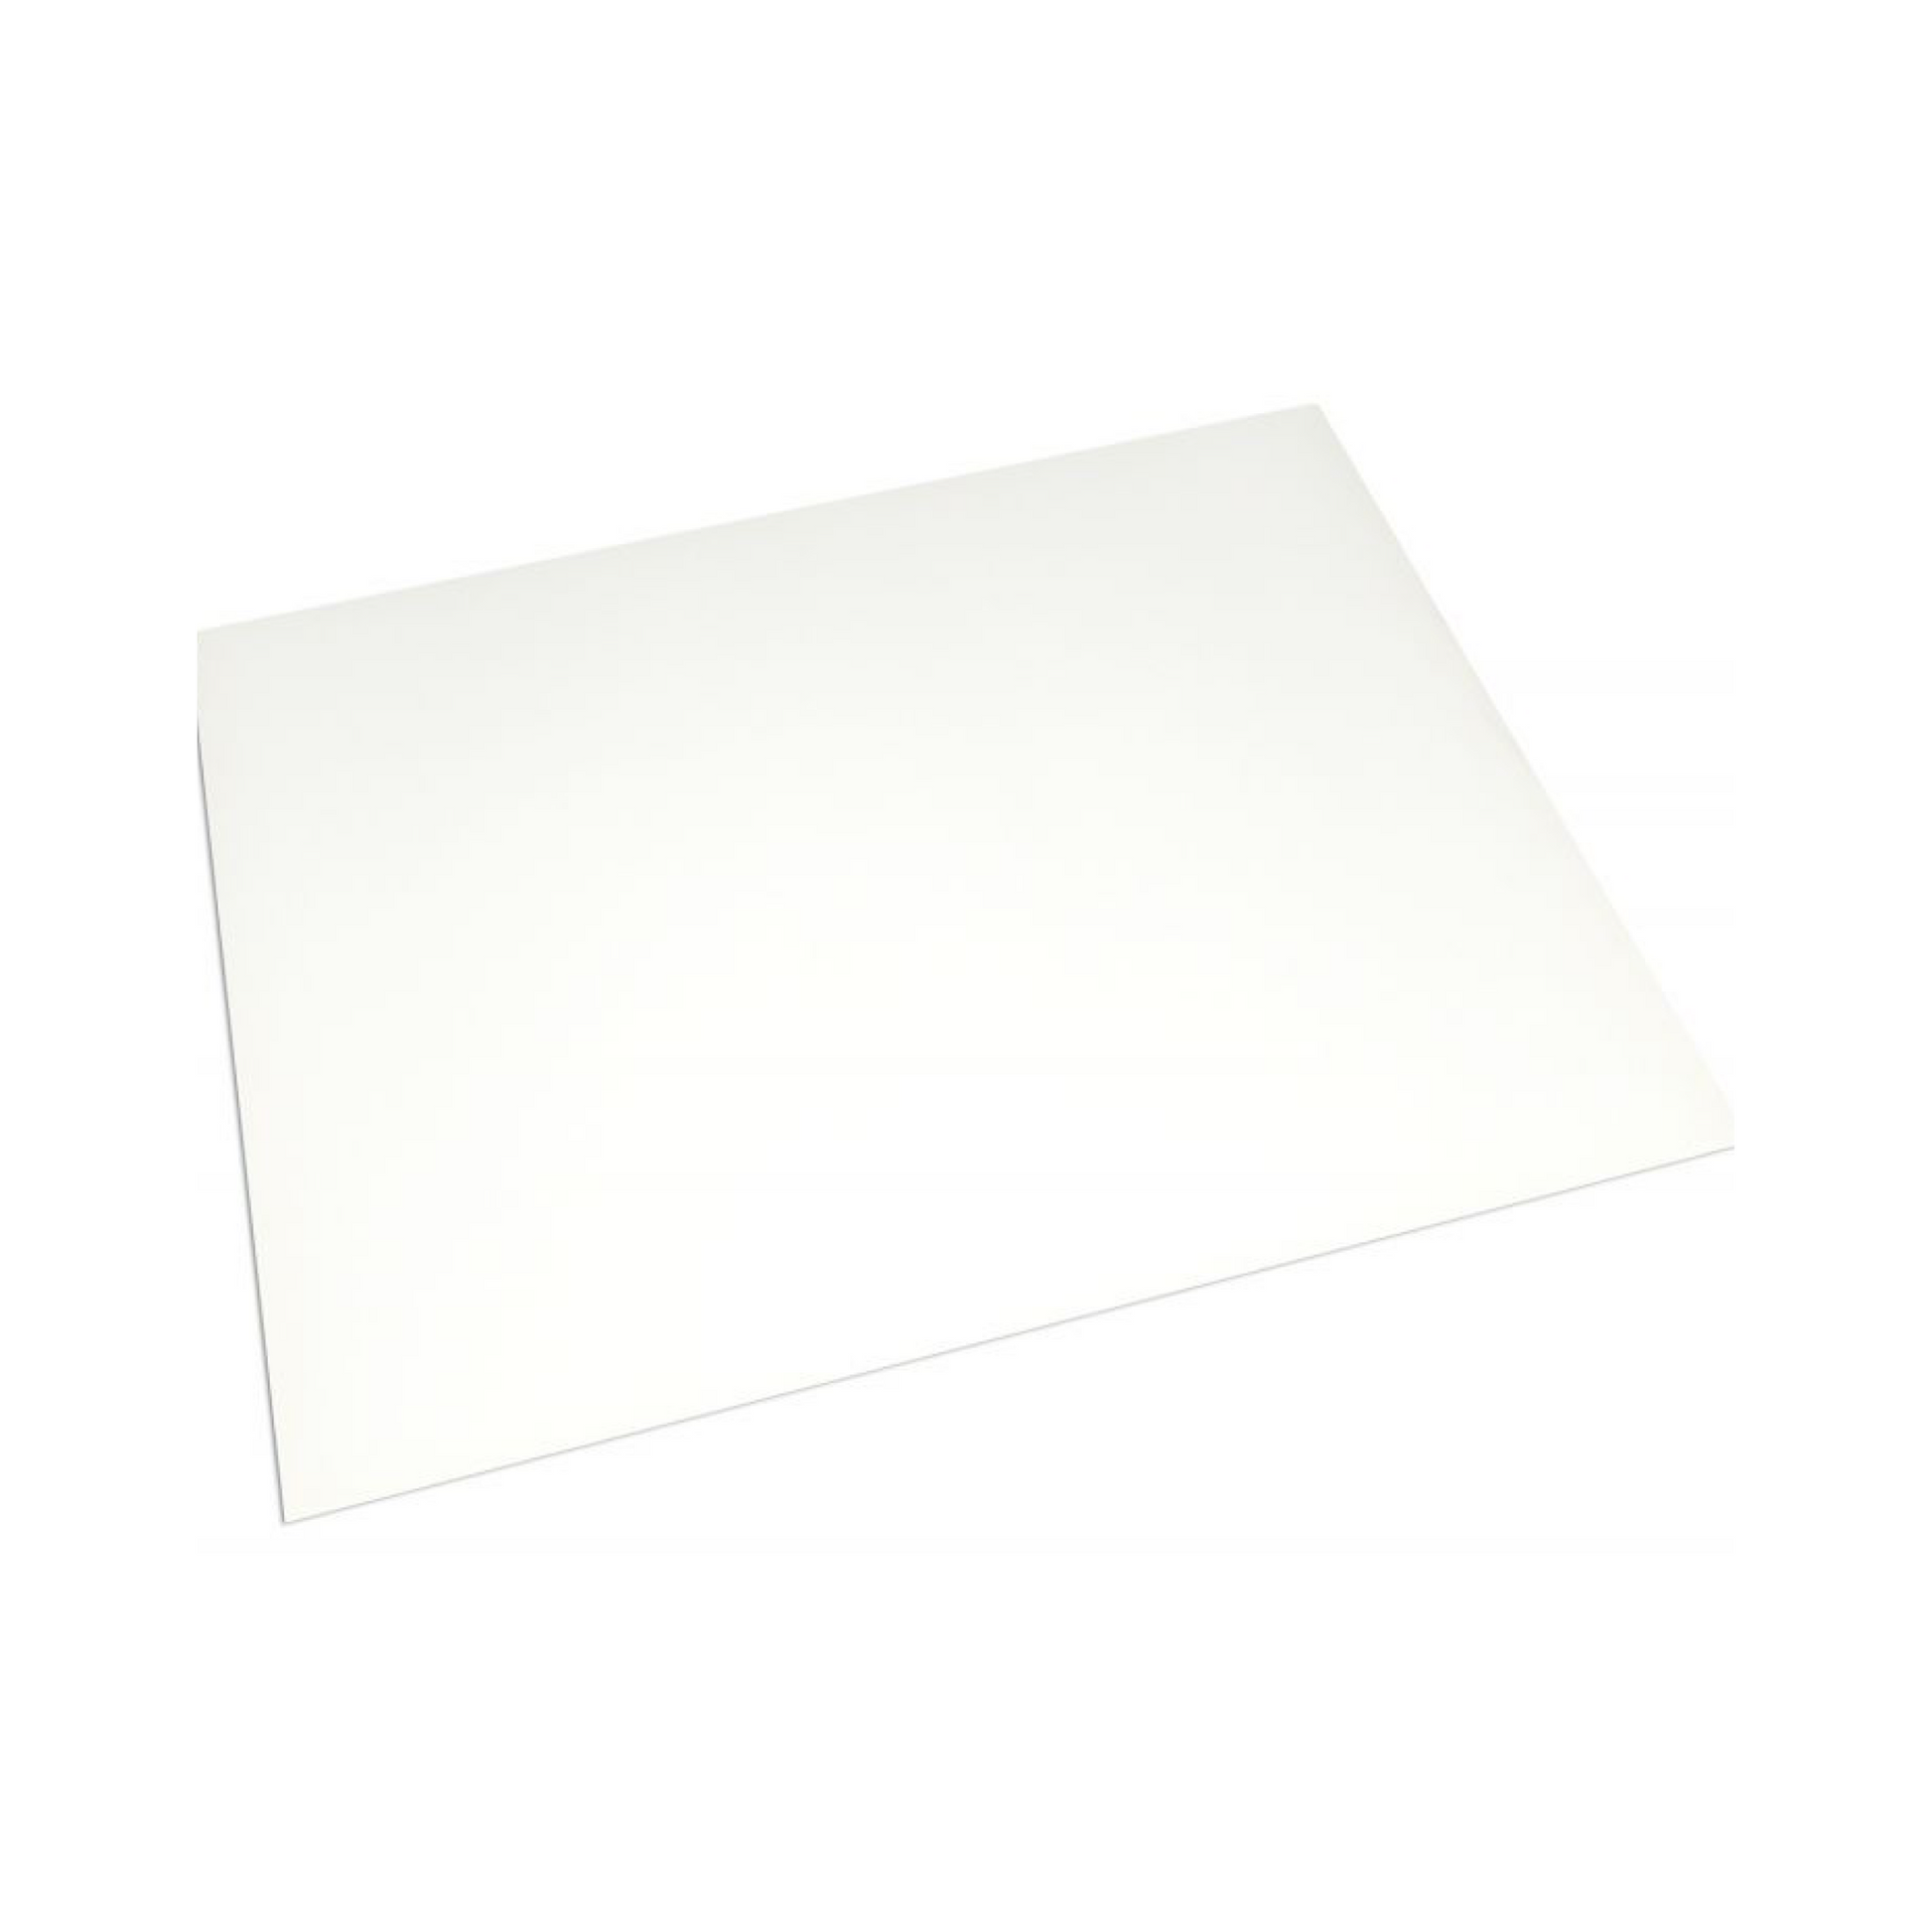 The Heavy Poster Board white